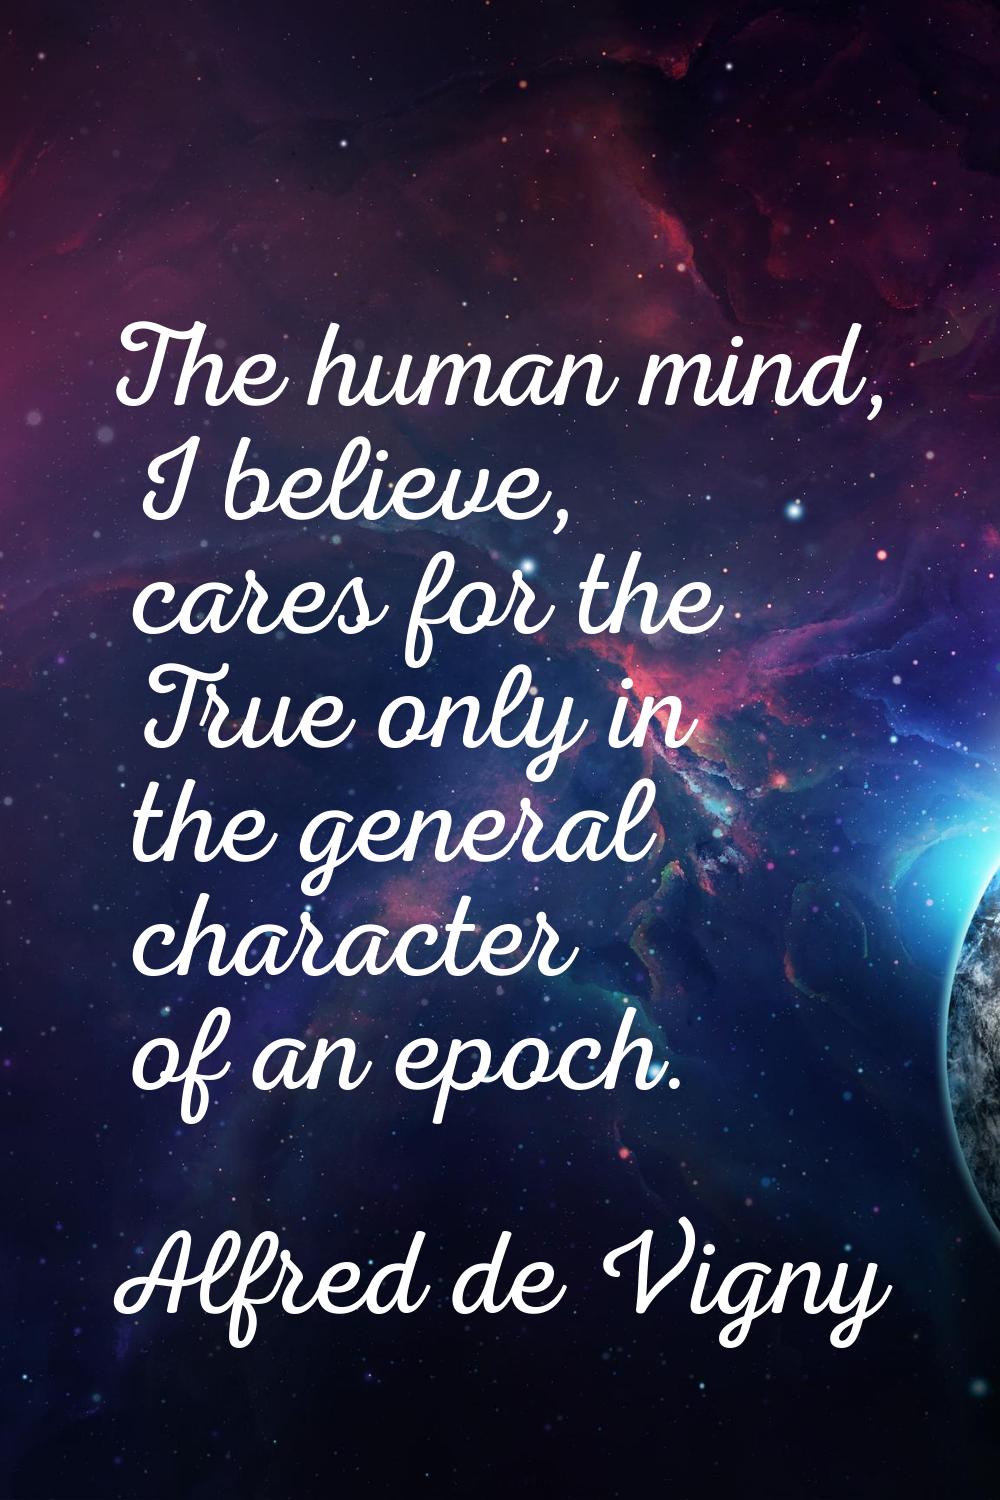 The human mind, I believe, cares for the True only in the general character of an epoch.